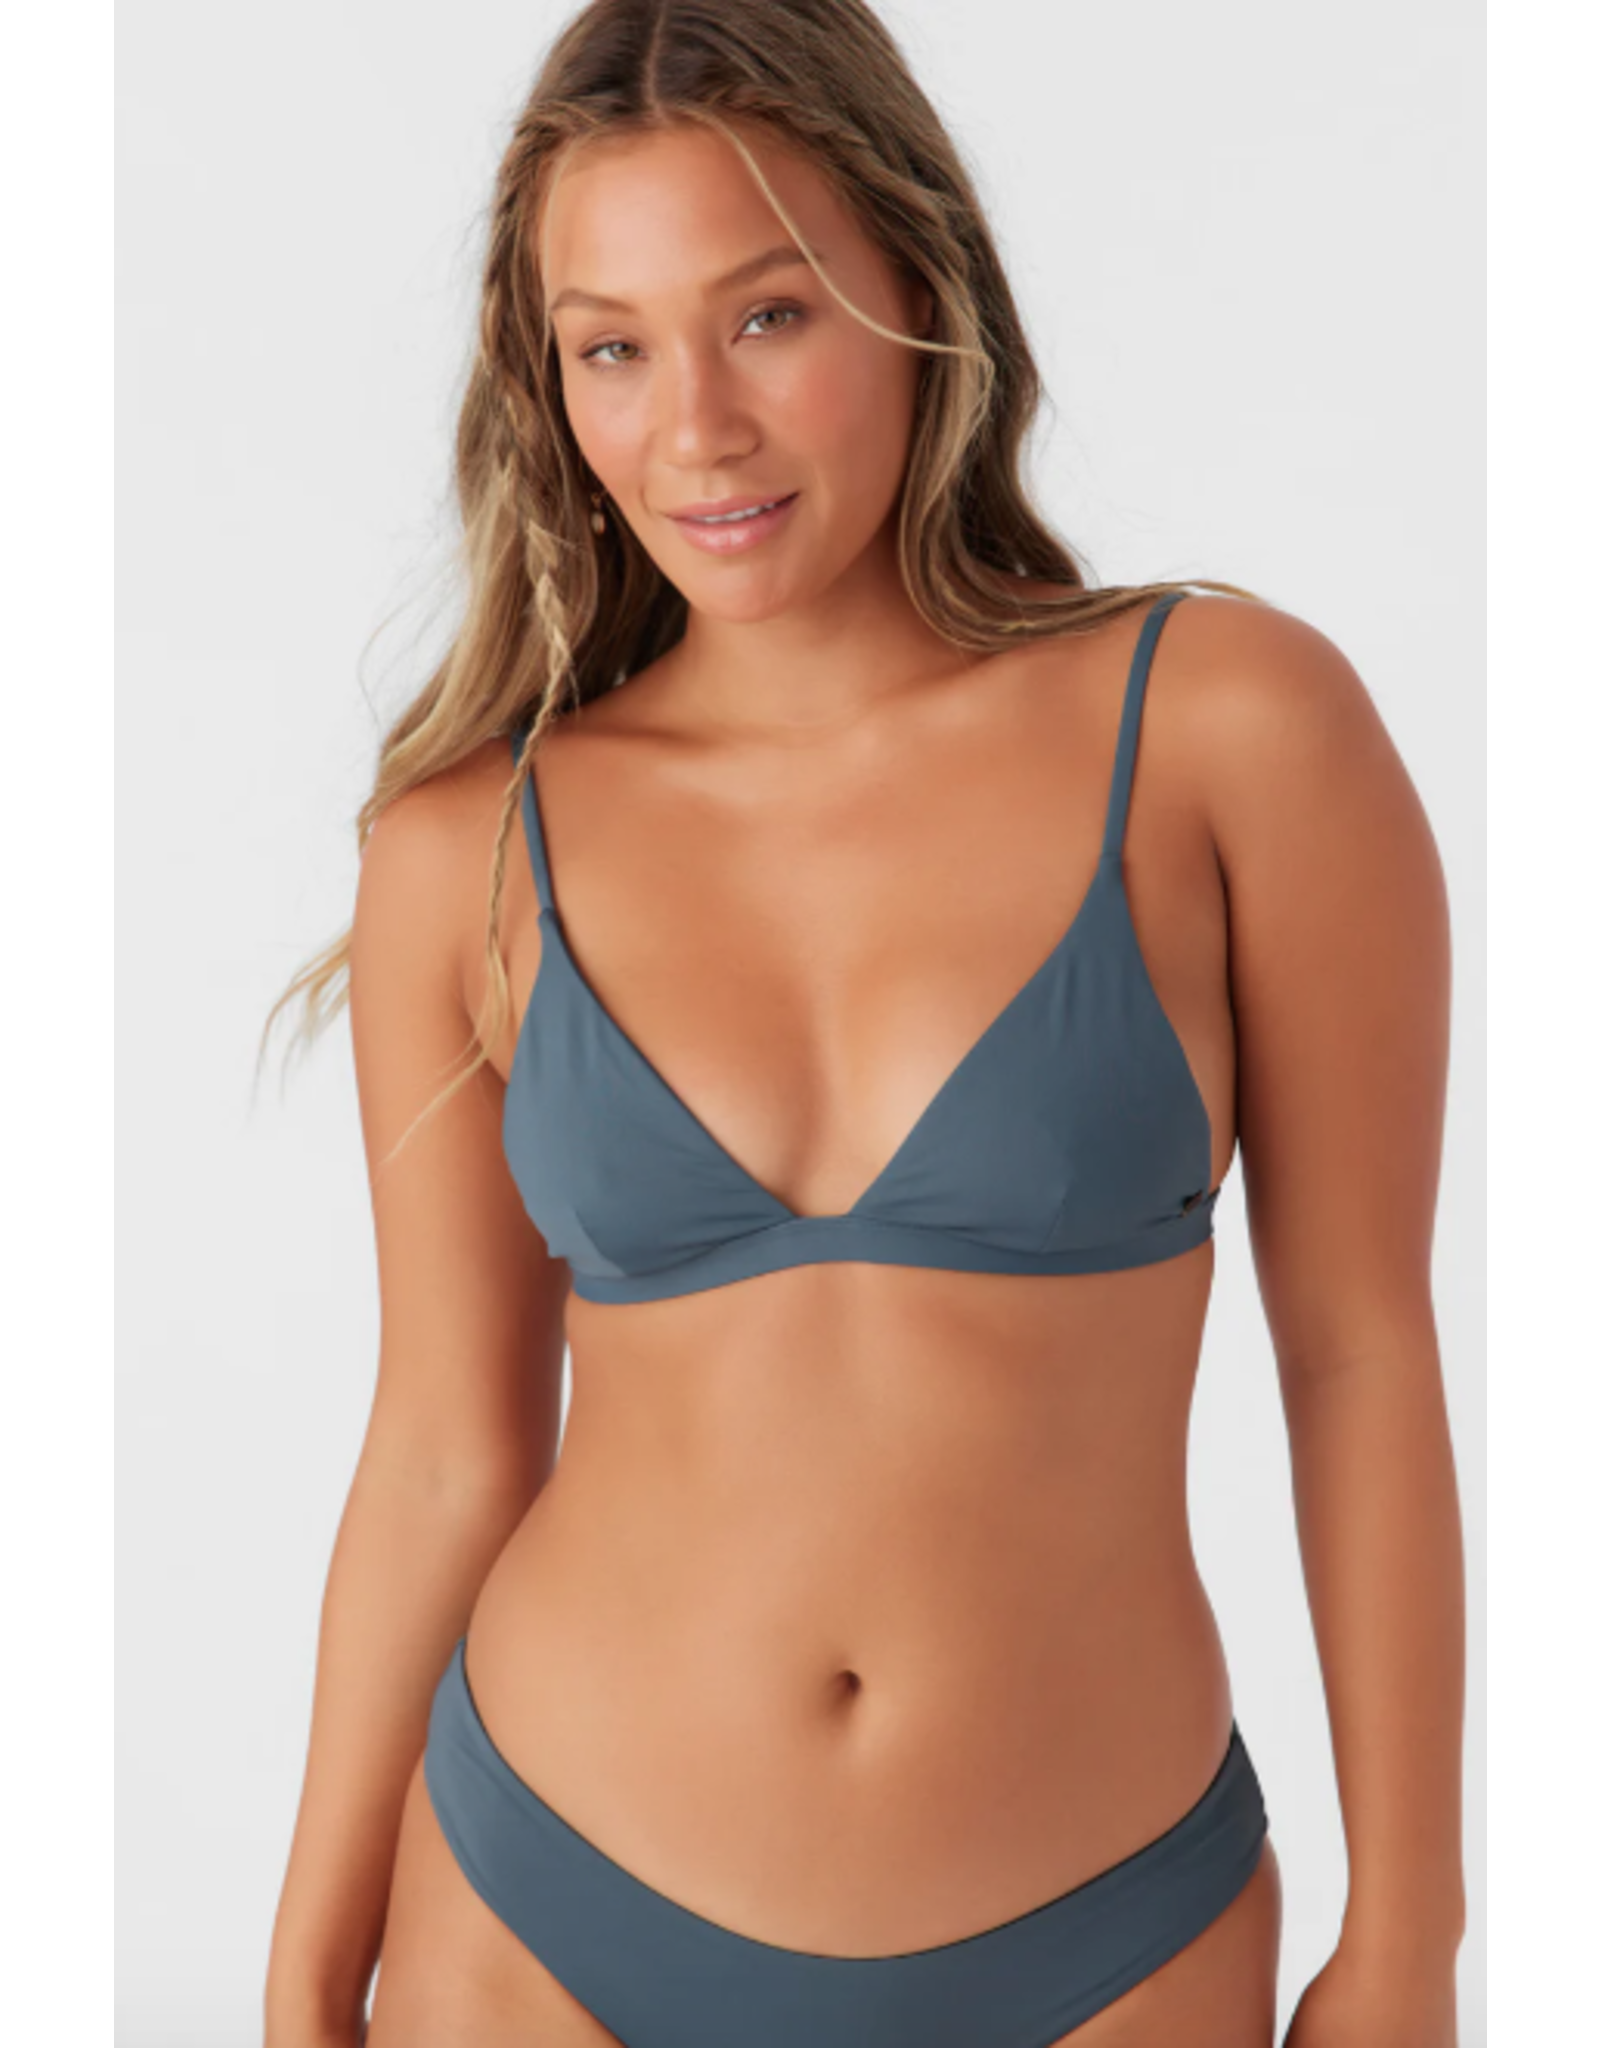 O'NEILL SALTWATER SOLIDS SEASIDE TRIANGLE TOP